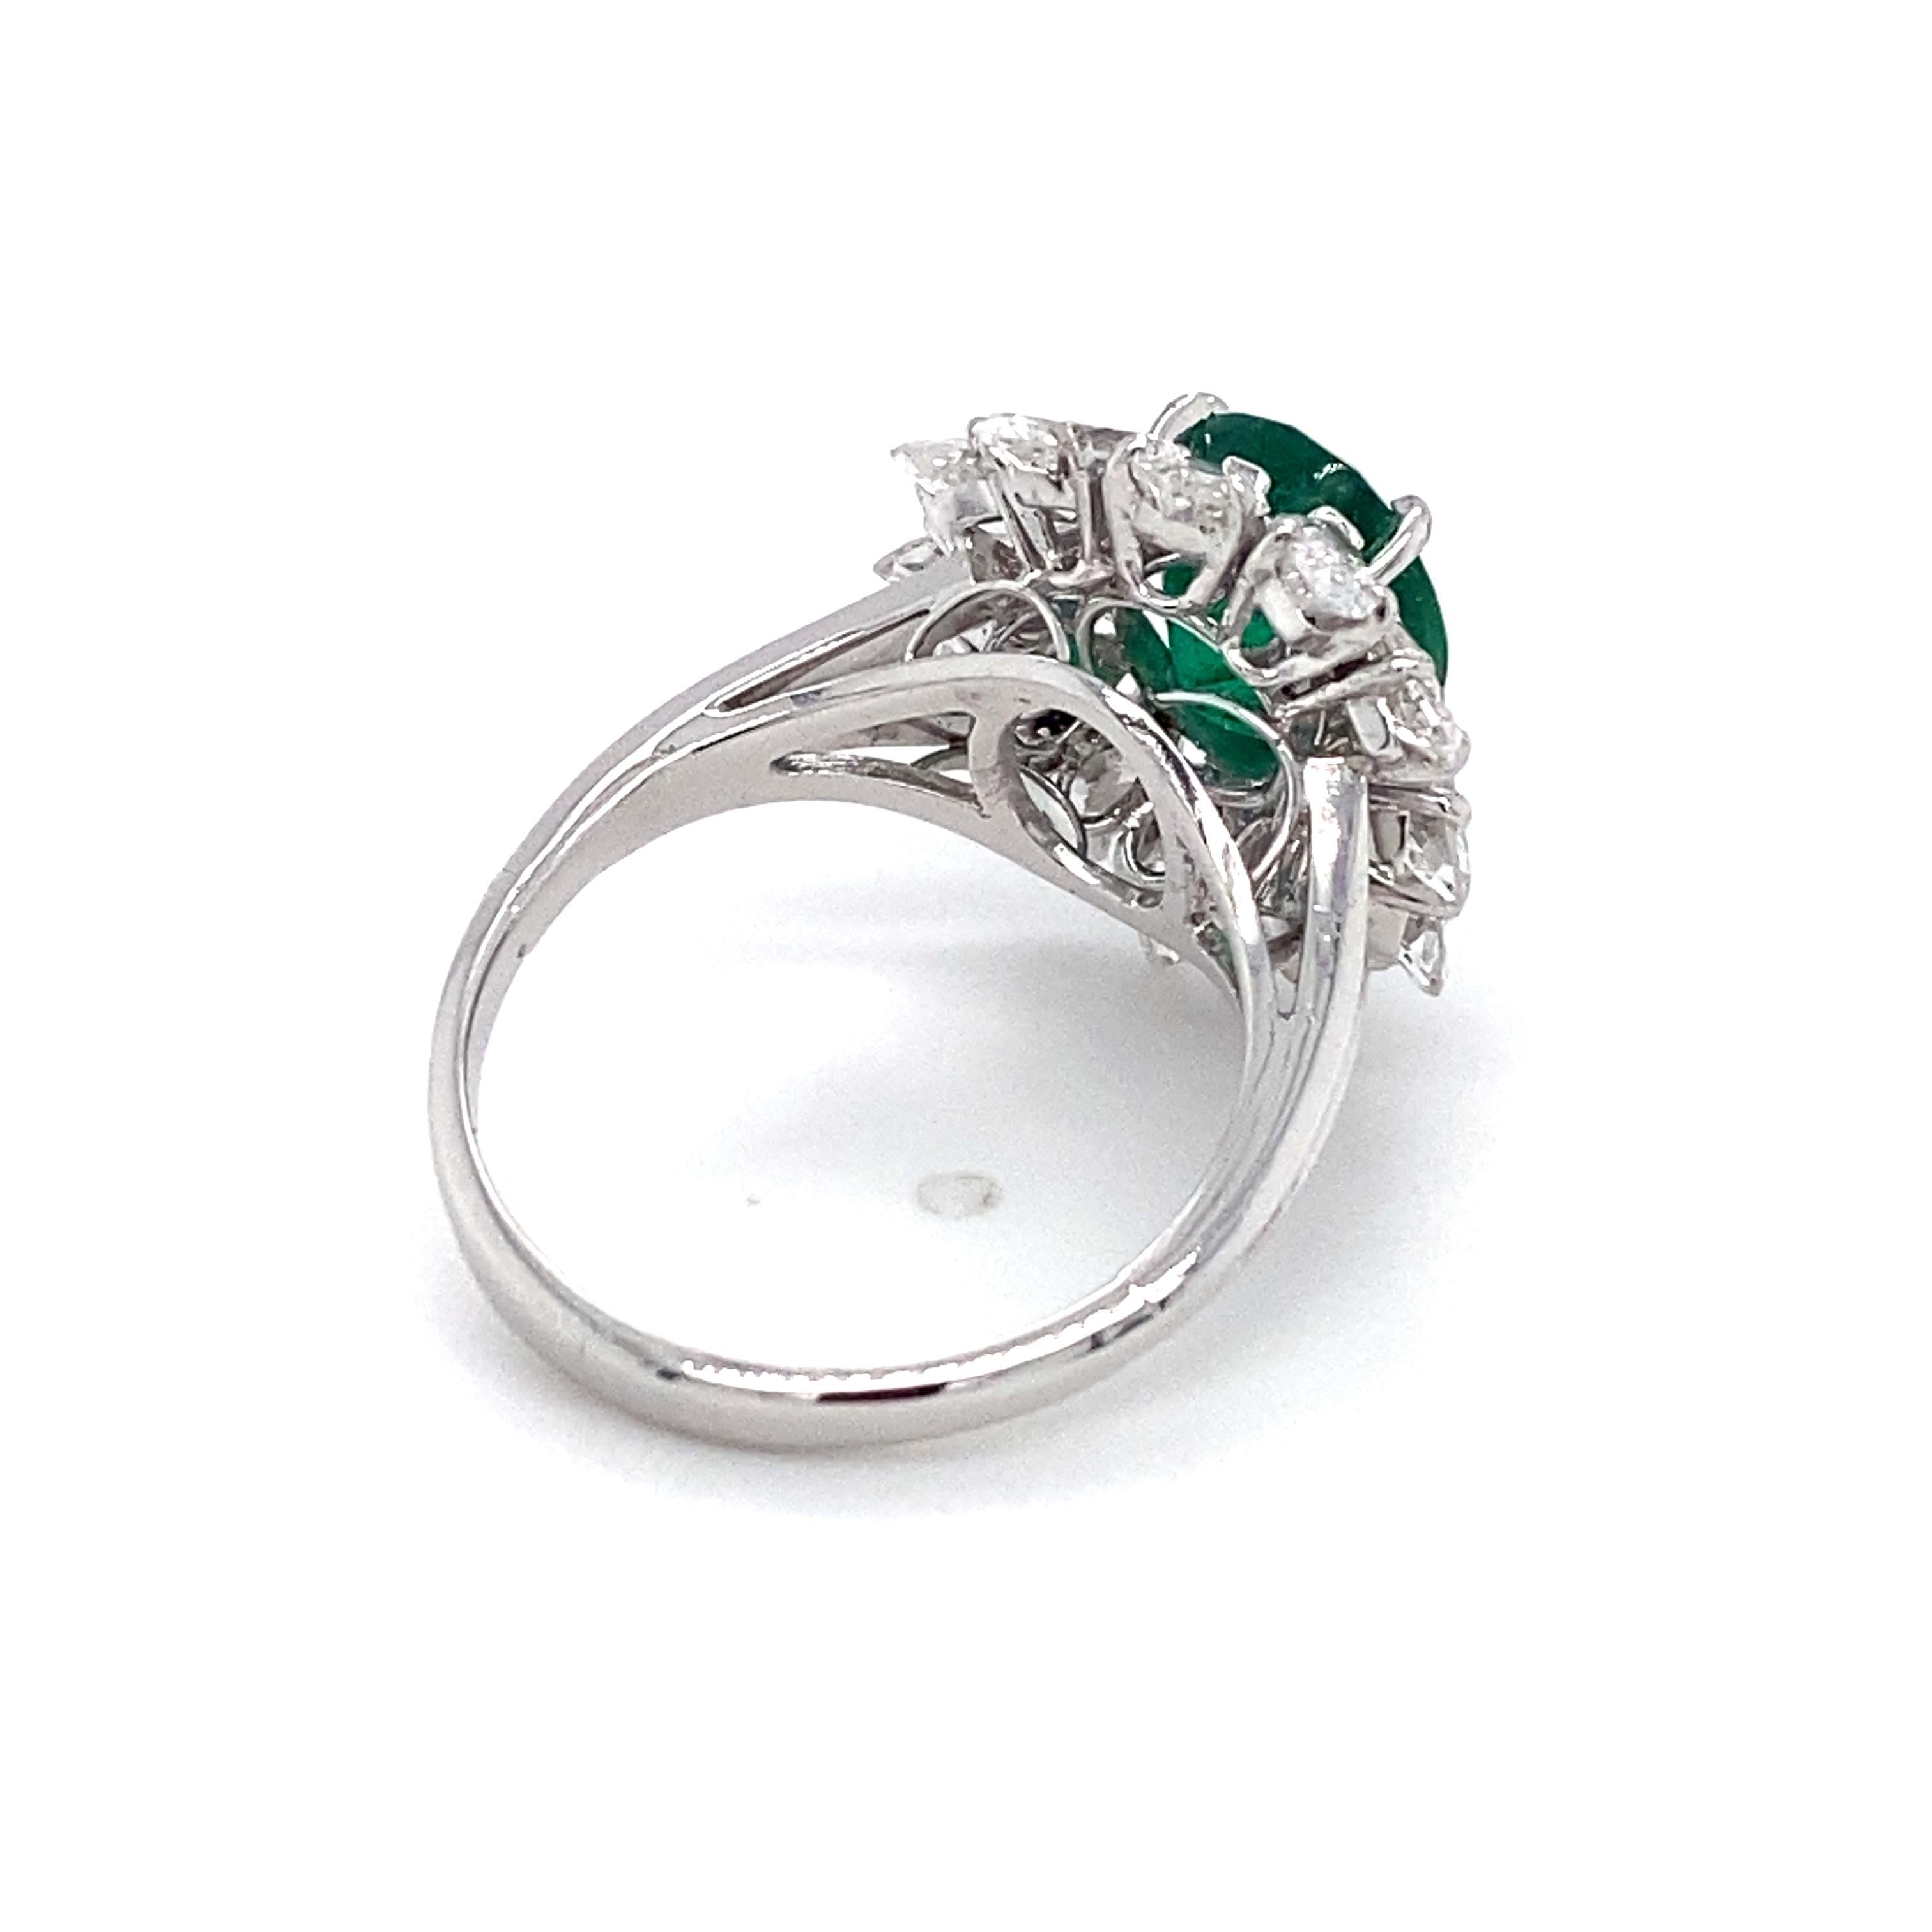 Basic Info
NB00044
18K White Gold
Cocktail Ring with Oval Shape Emerald GIA Certified 2.43ct & 12 Marquis Shape Diamonds 0.25ct F-G, VS1 each, 3.0ct Total. 
Ring Size 6.25
Ring Weight 6.9 Grams